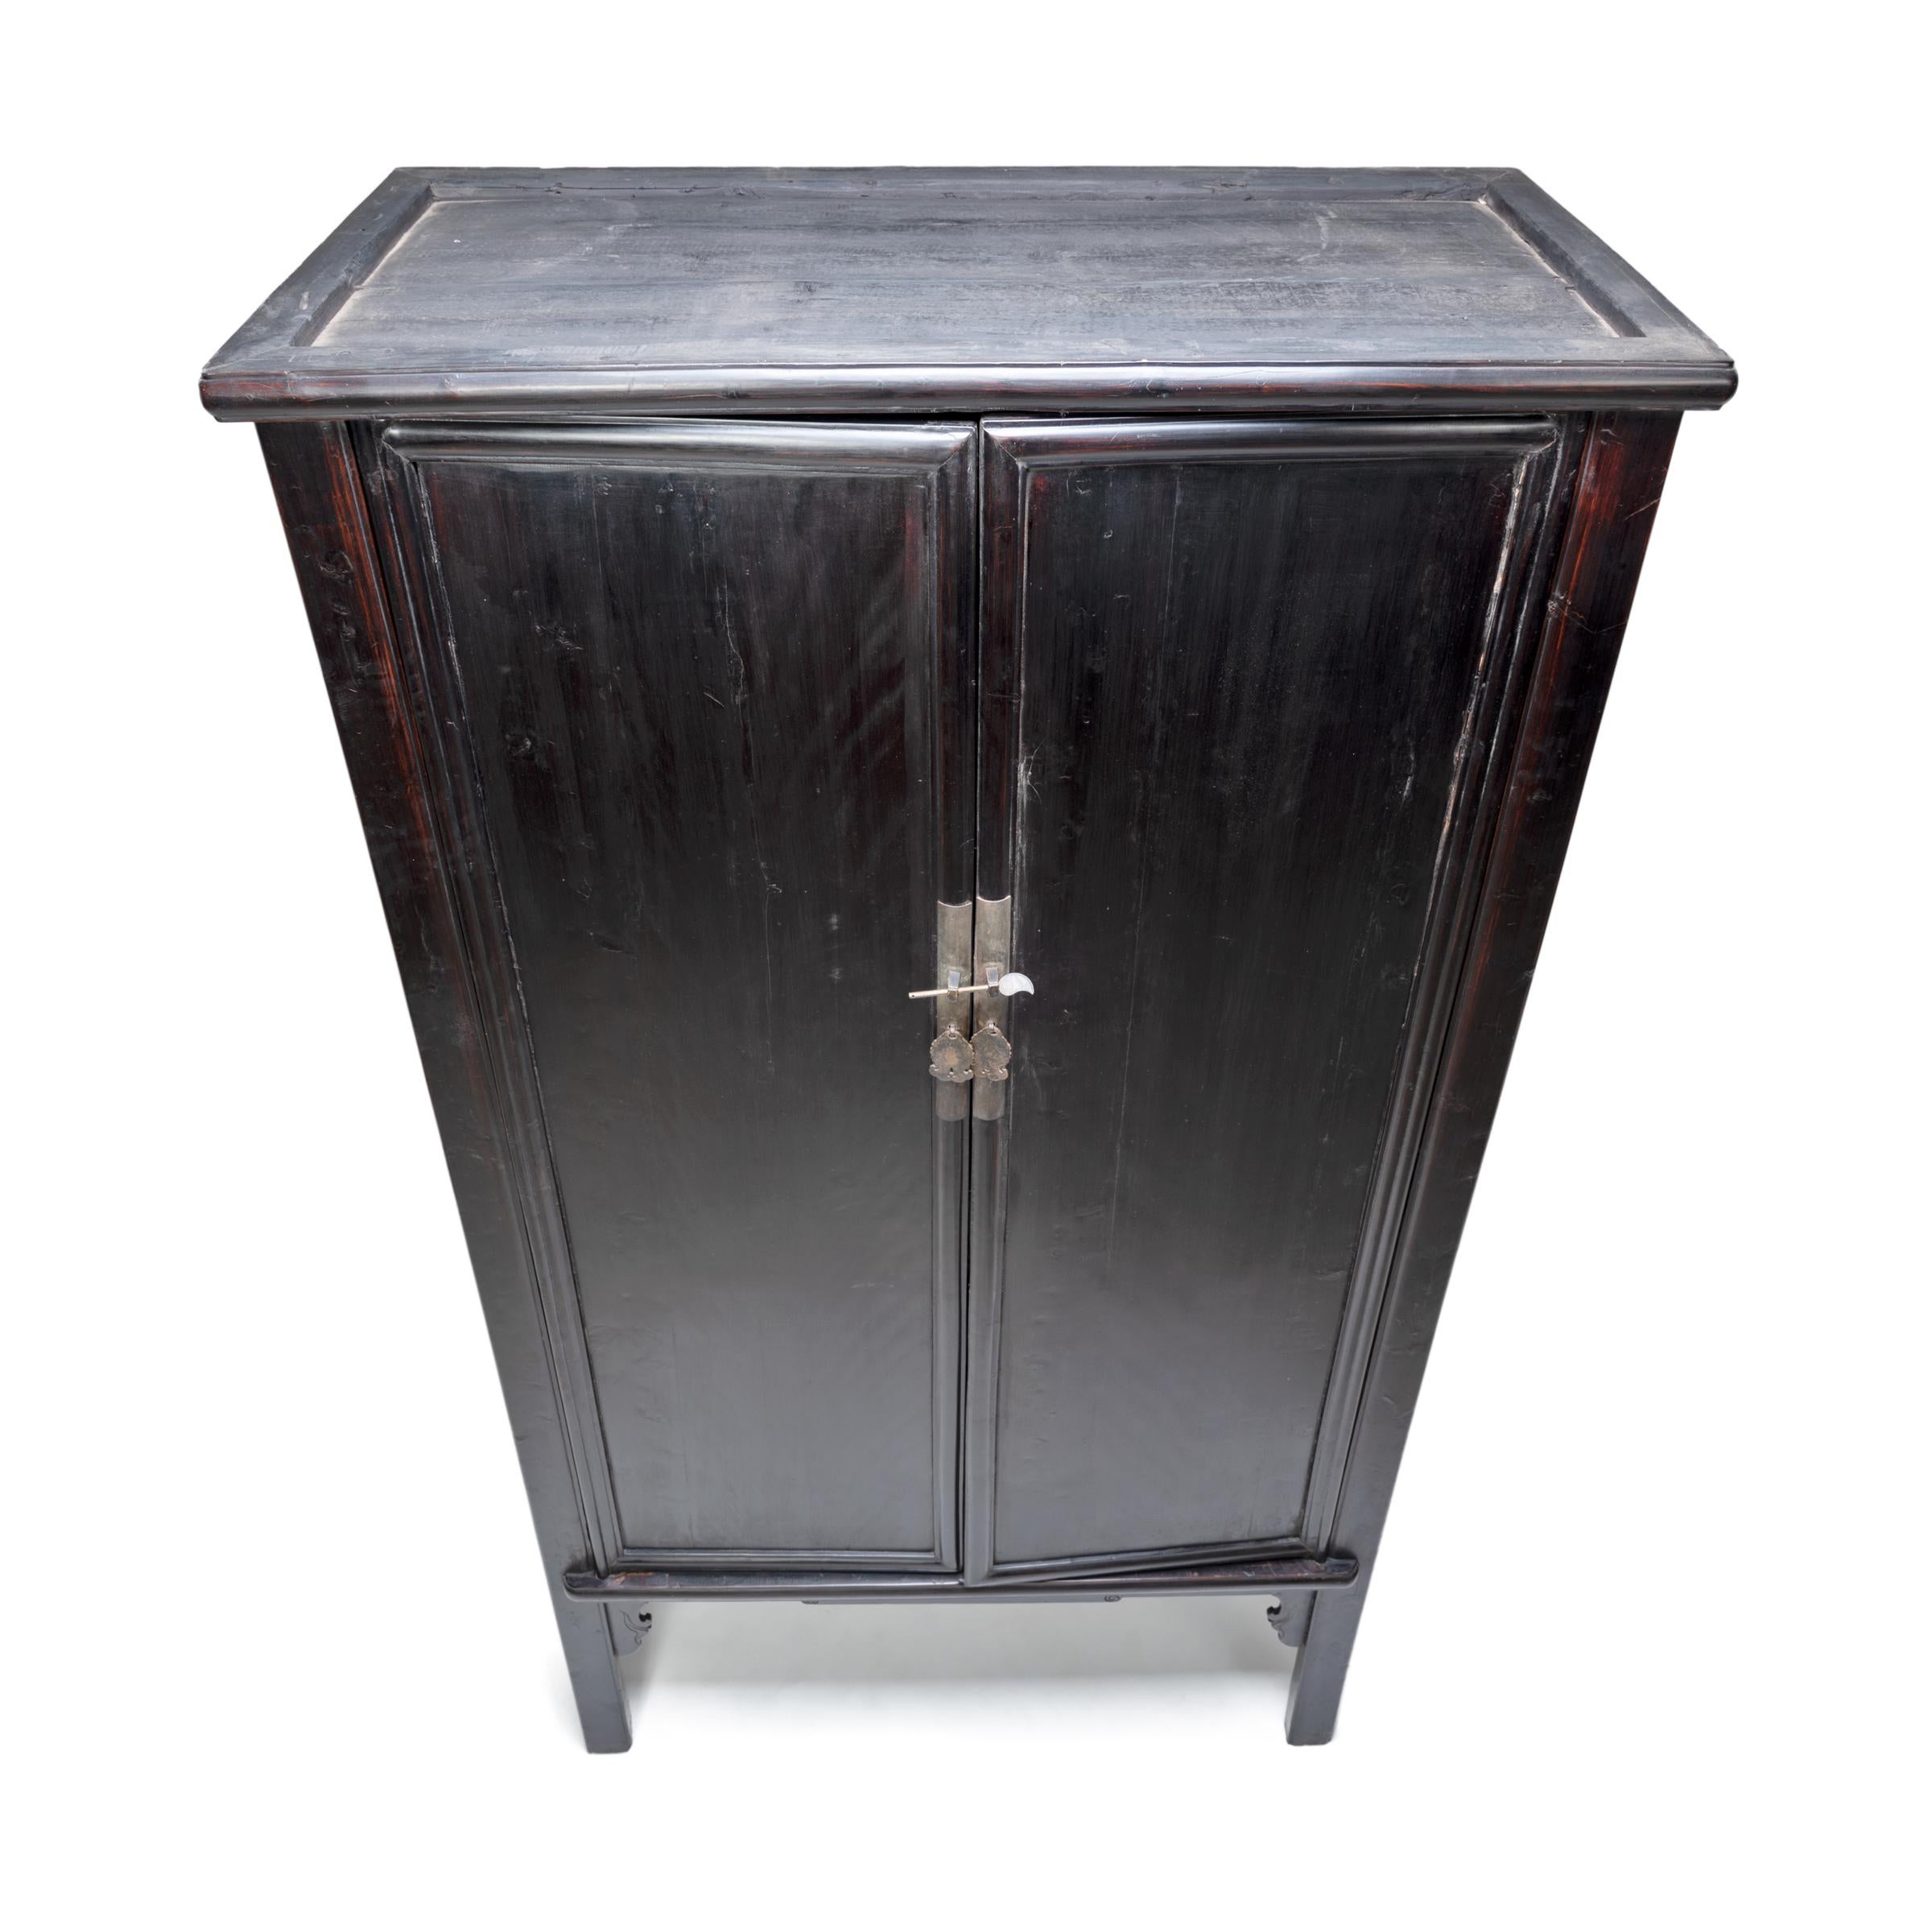 19th Century Chinese Black Lacquer Scholar's Cabinet, c. 1850